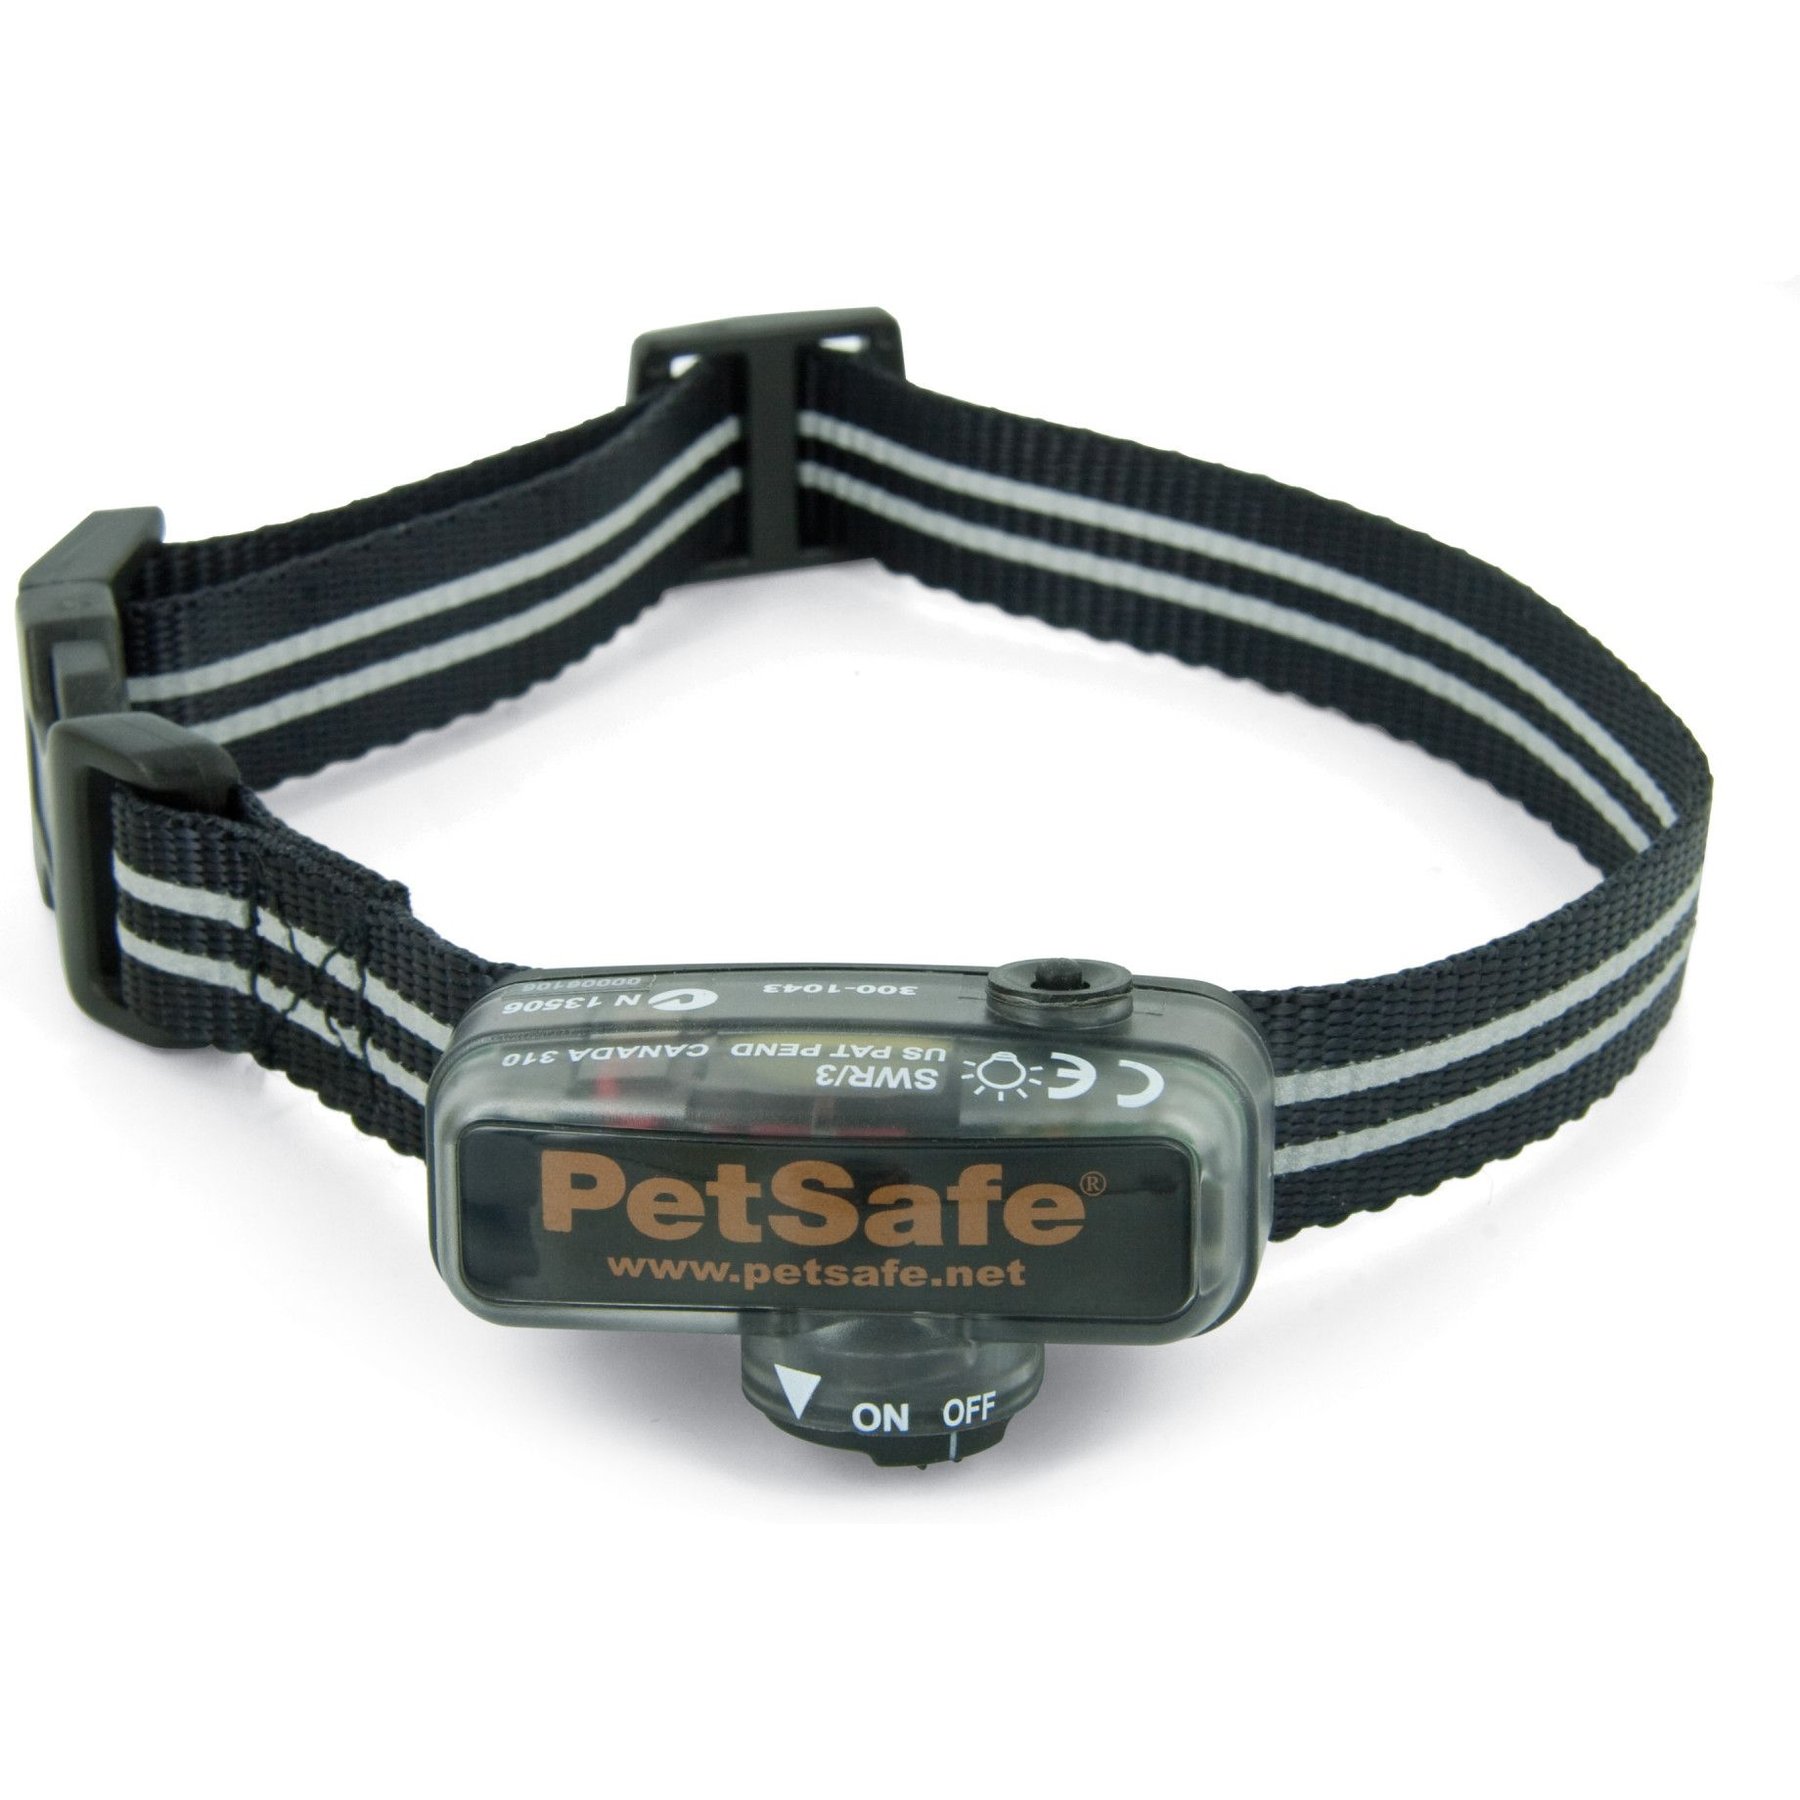 PetSafe® Deluxe In-Ground Fence UltraLight™ Receiver Collar